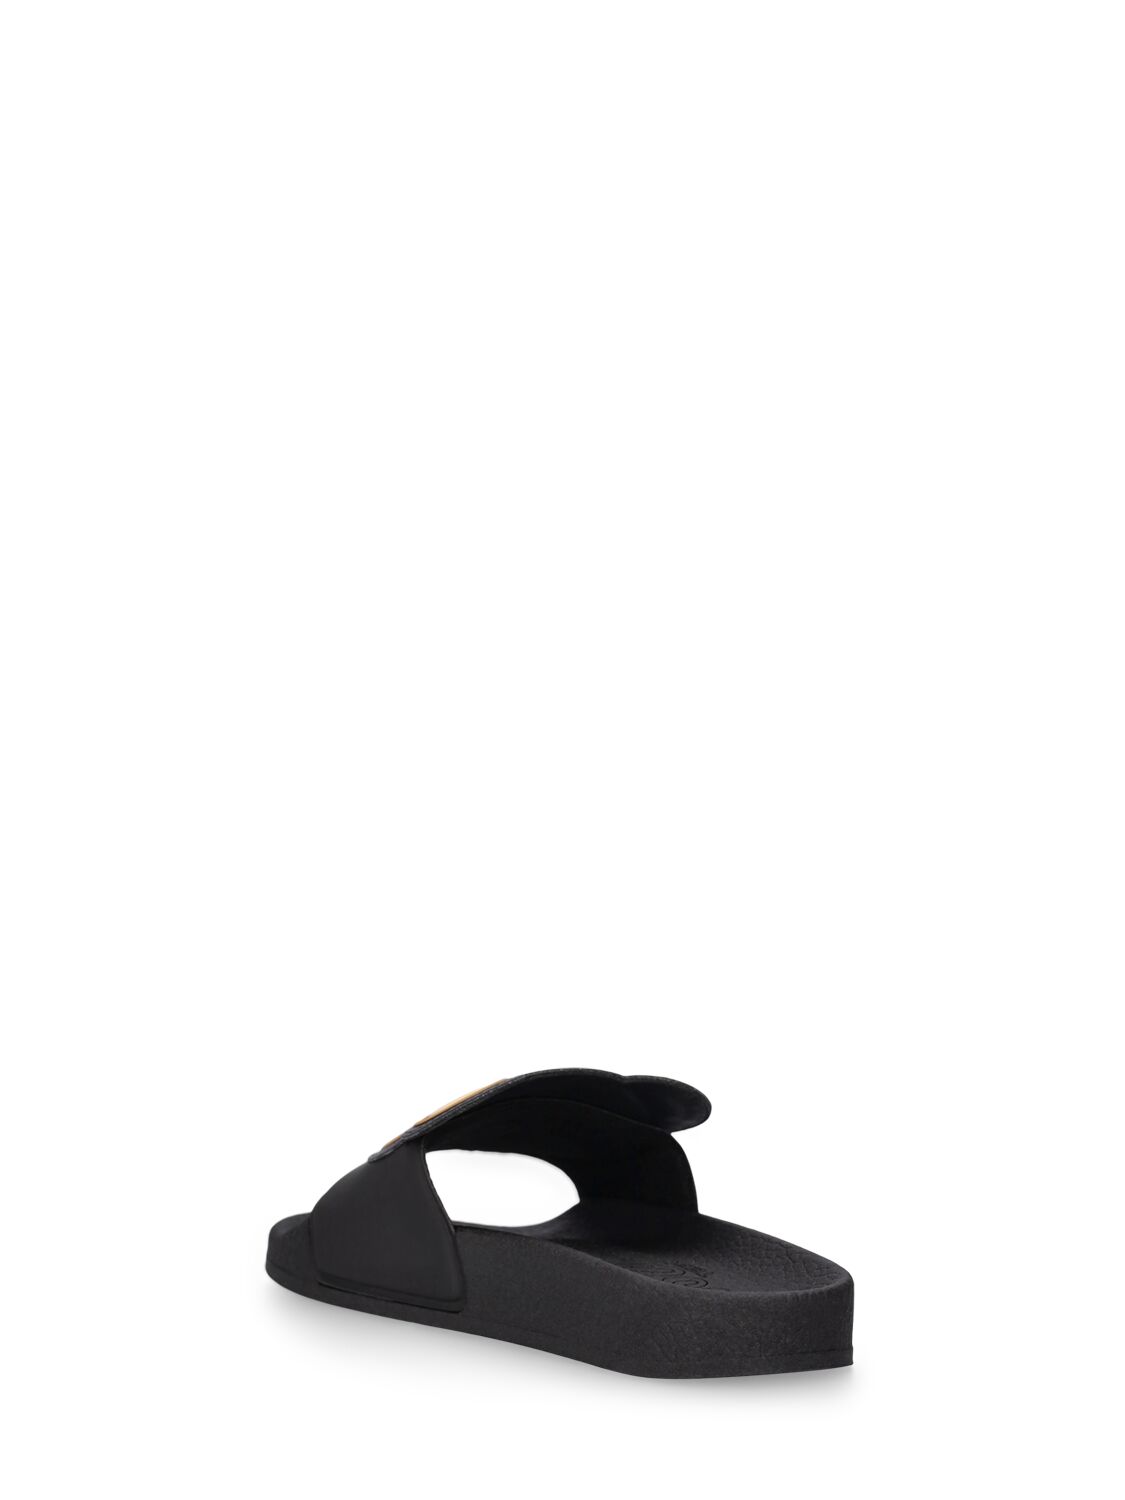 Shop Moschino Logo Print Rubber Slide Sandals W/ Patch In Black